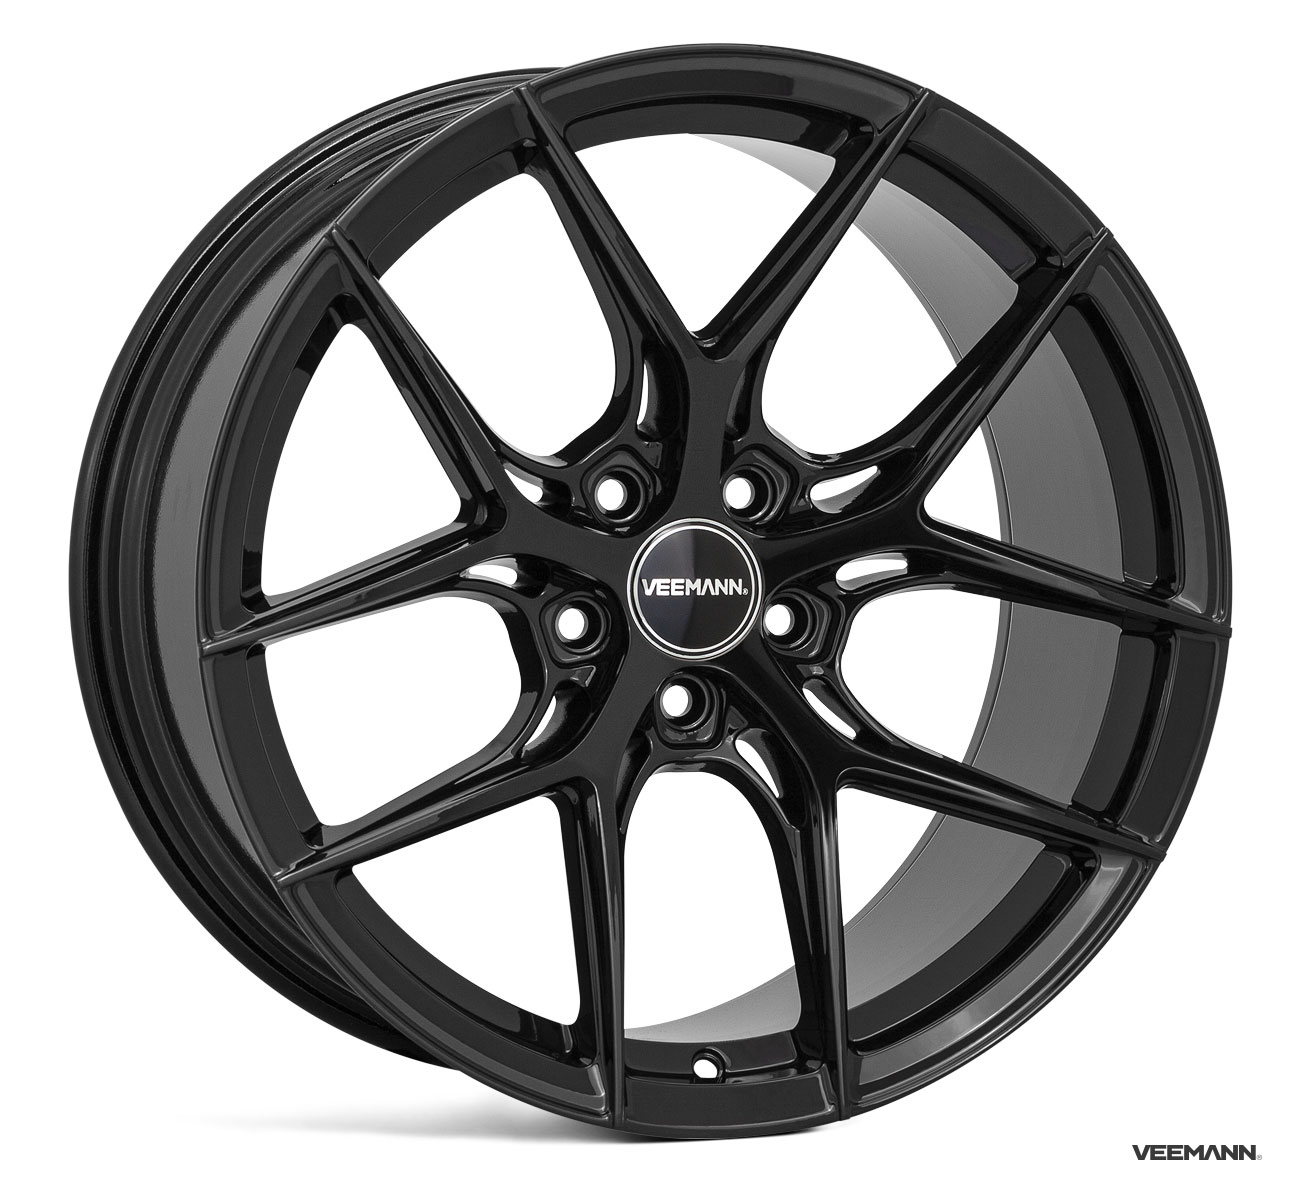 NEW 20" VEEMANN VC580R ALLOY WHEELS IN GLOSS BLACK WITH WIDER 10.5" REARS